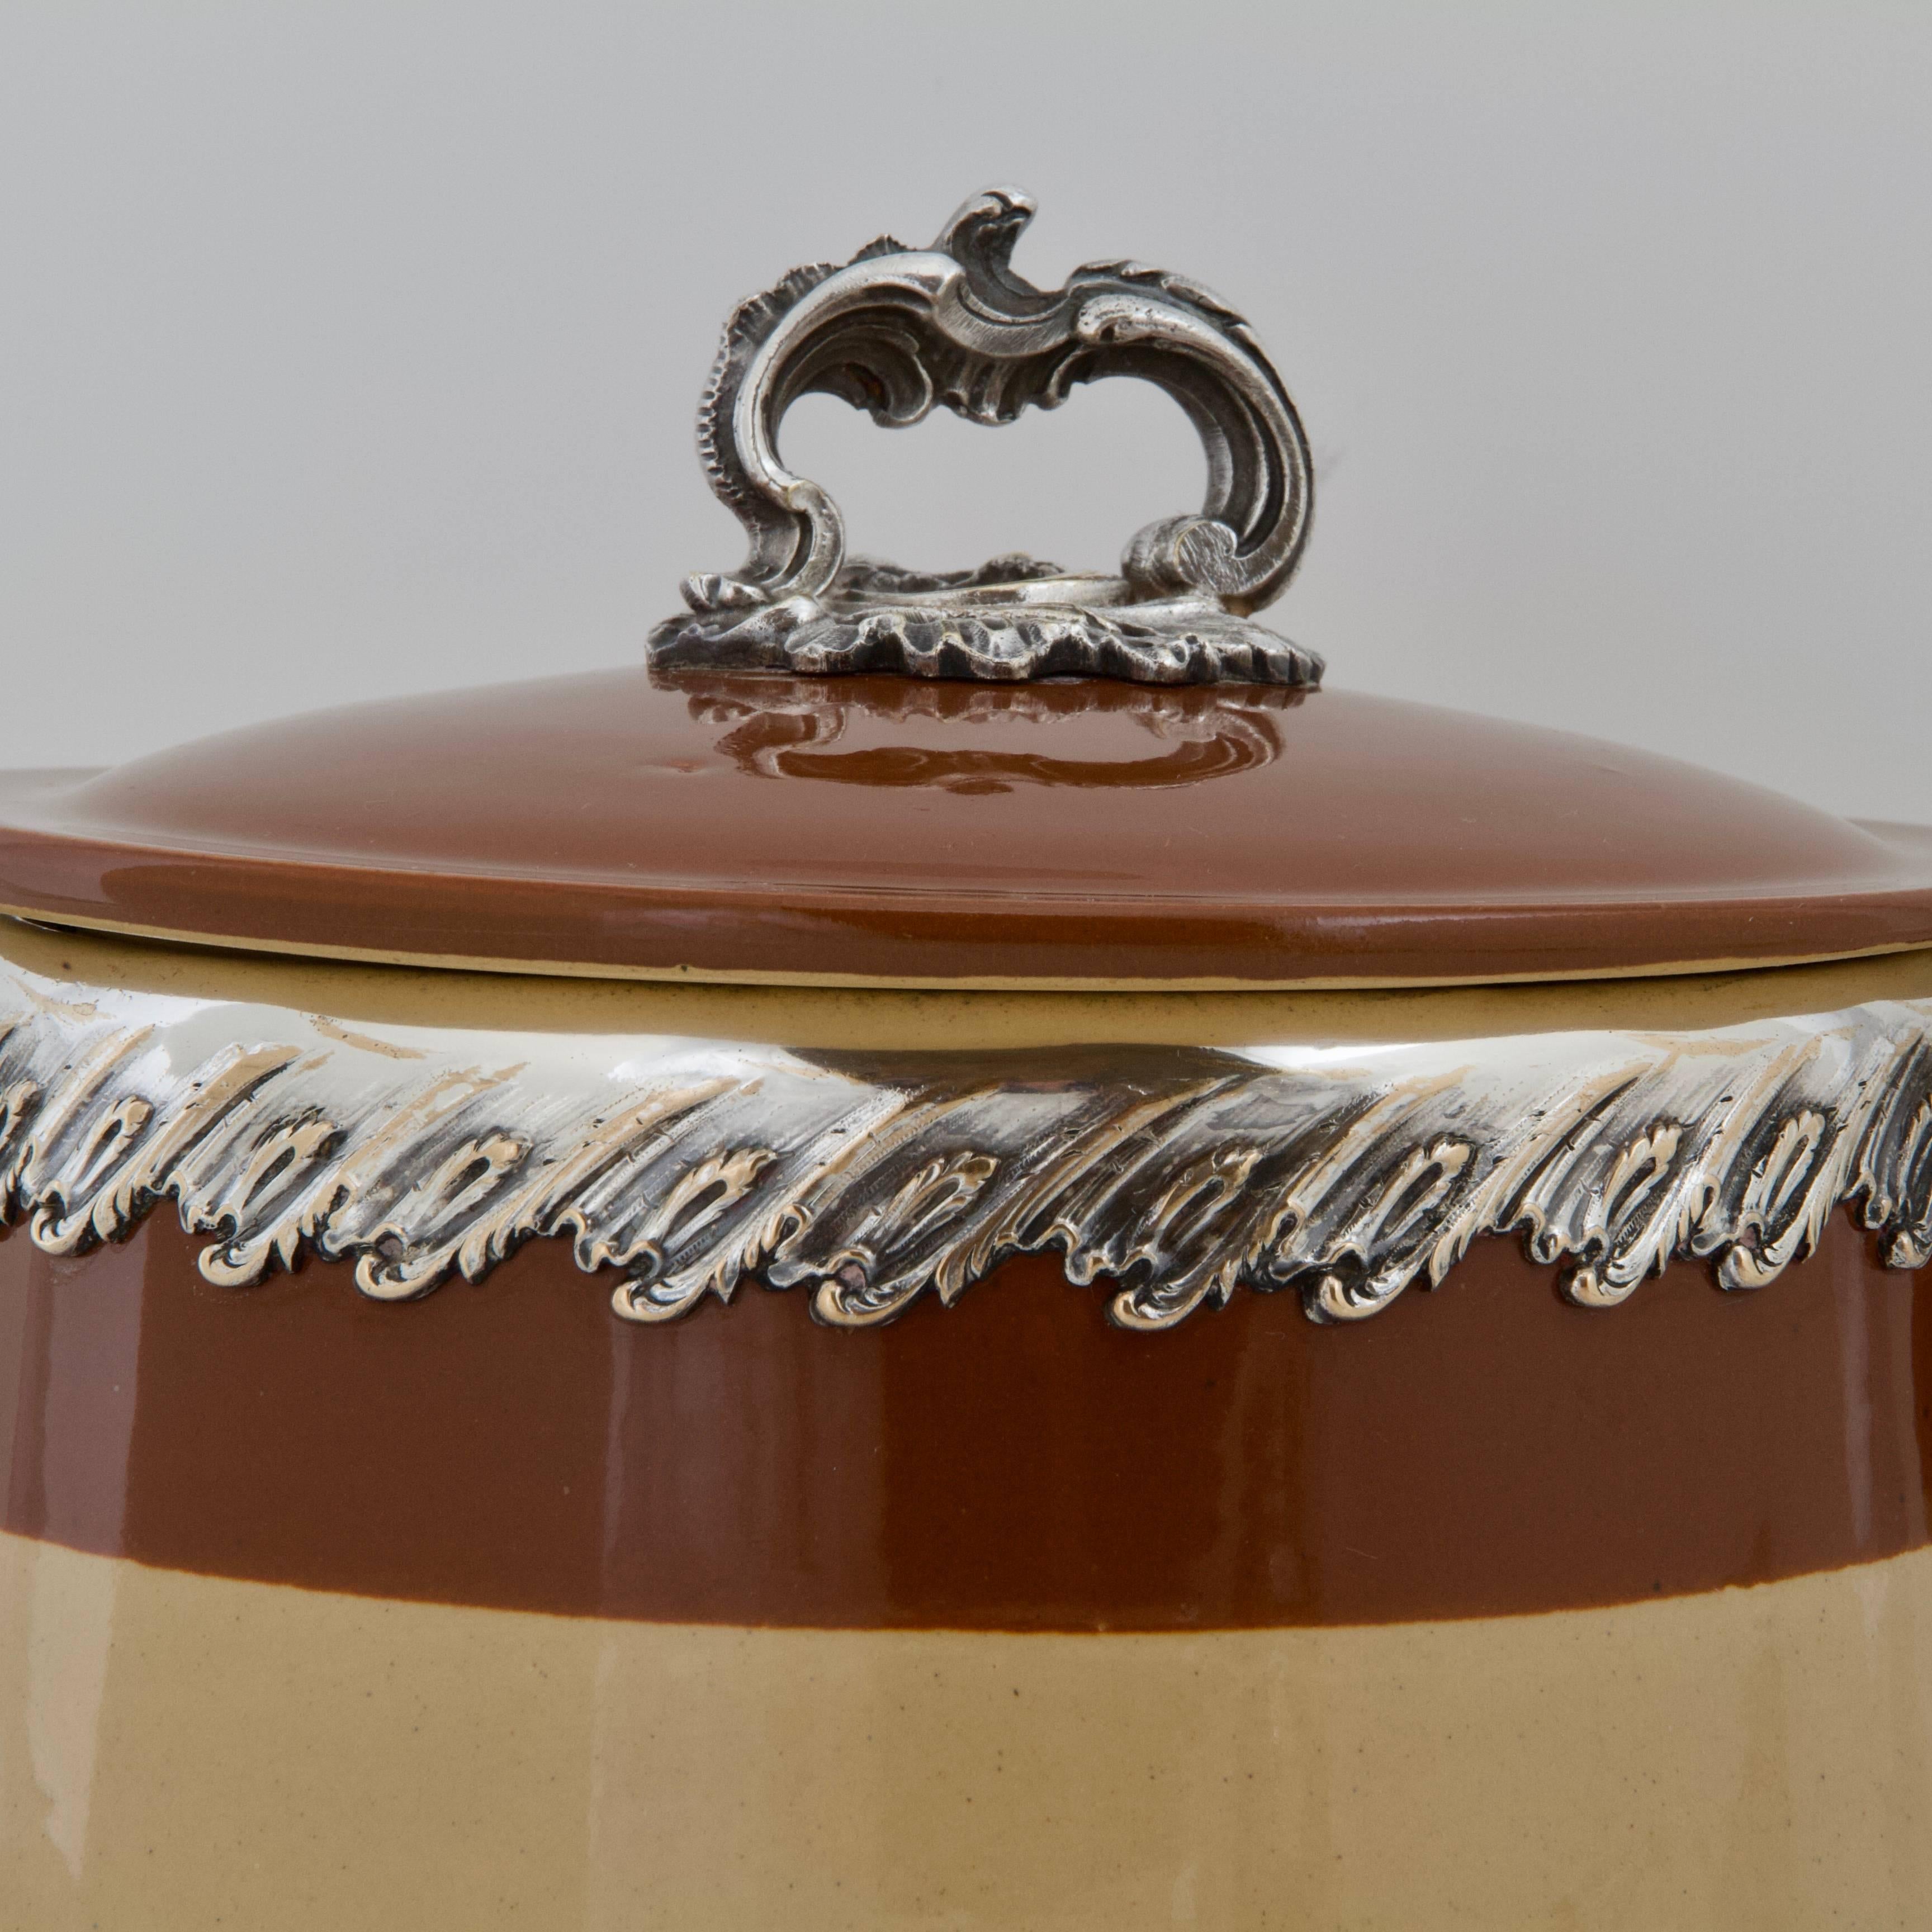 Bicolour terracotta glazed soup tureen framed with a silver plate Rococo flange. Swirling silver plate handle on the cover. 

Mark on the bottom: VS/ B1.
Typical French Provençal work. South of France.
Provenance: French private collection, more